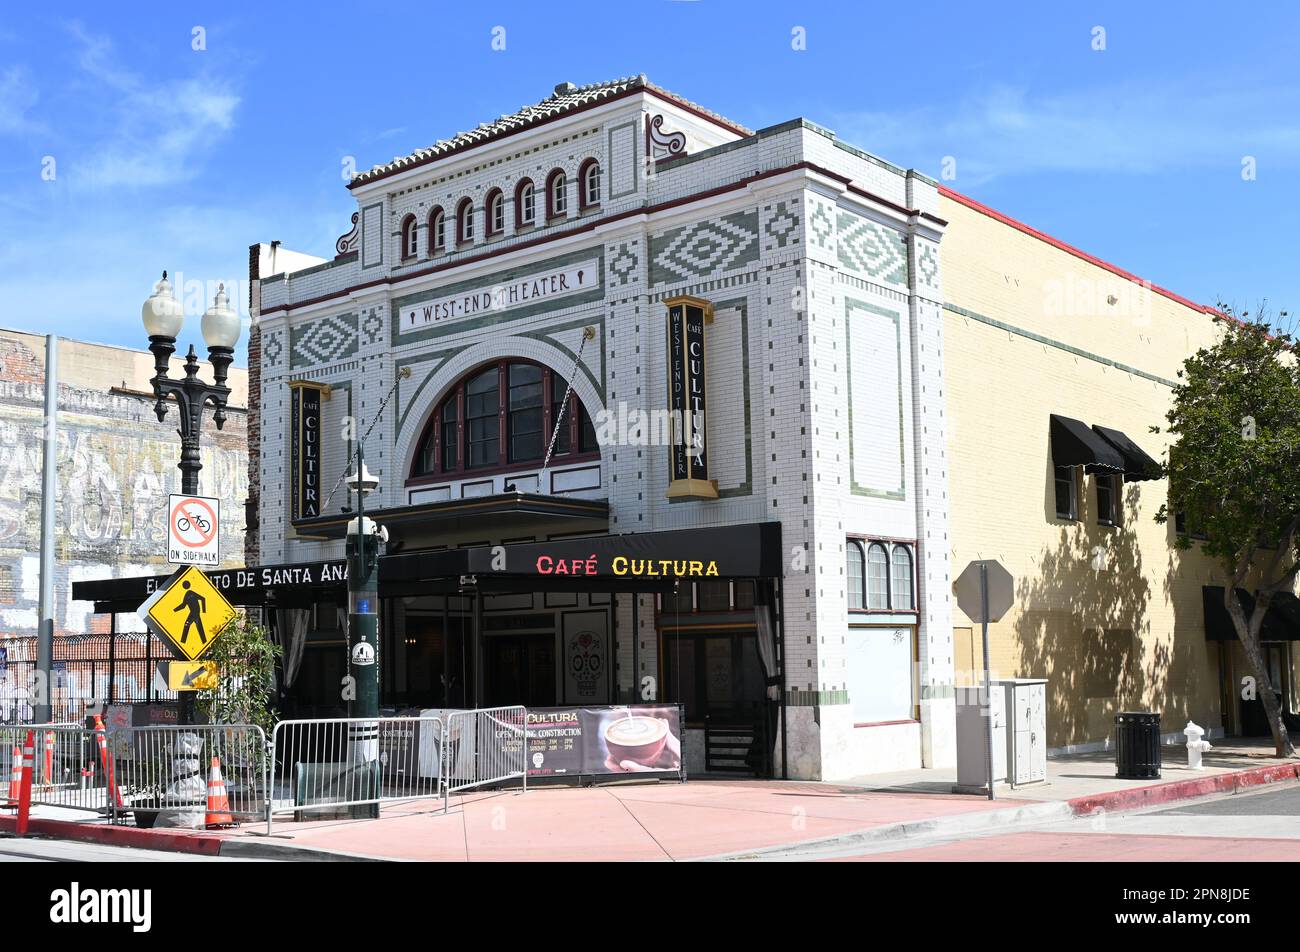 SANTA ANA, CALIFORNIA - 16 APR 2023: Cafe Cultura in the old West End Theater building on 4th Street in Downtown Santa Ana. Stock Photo